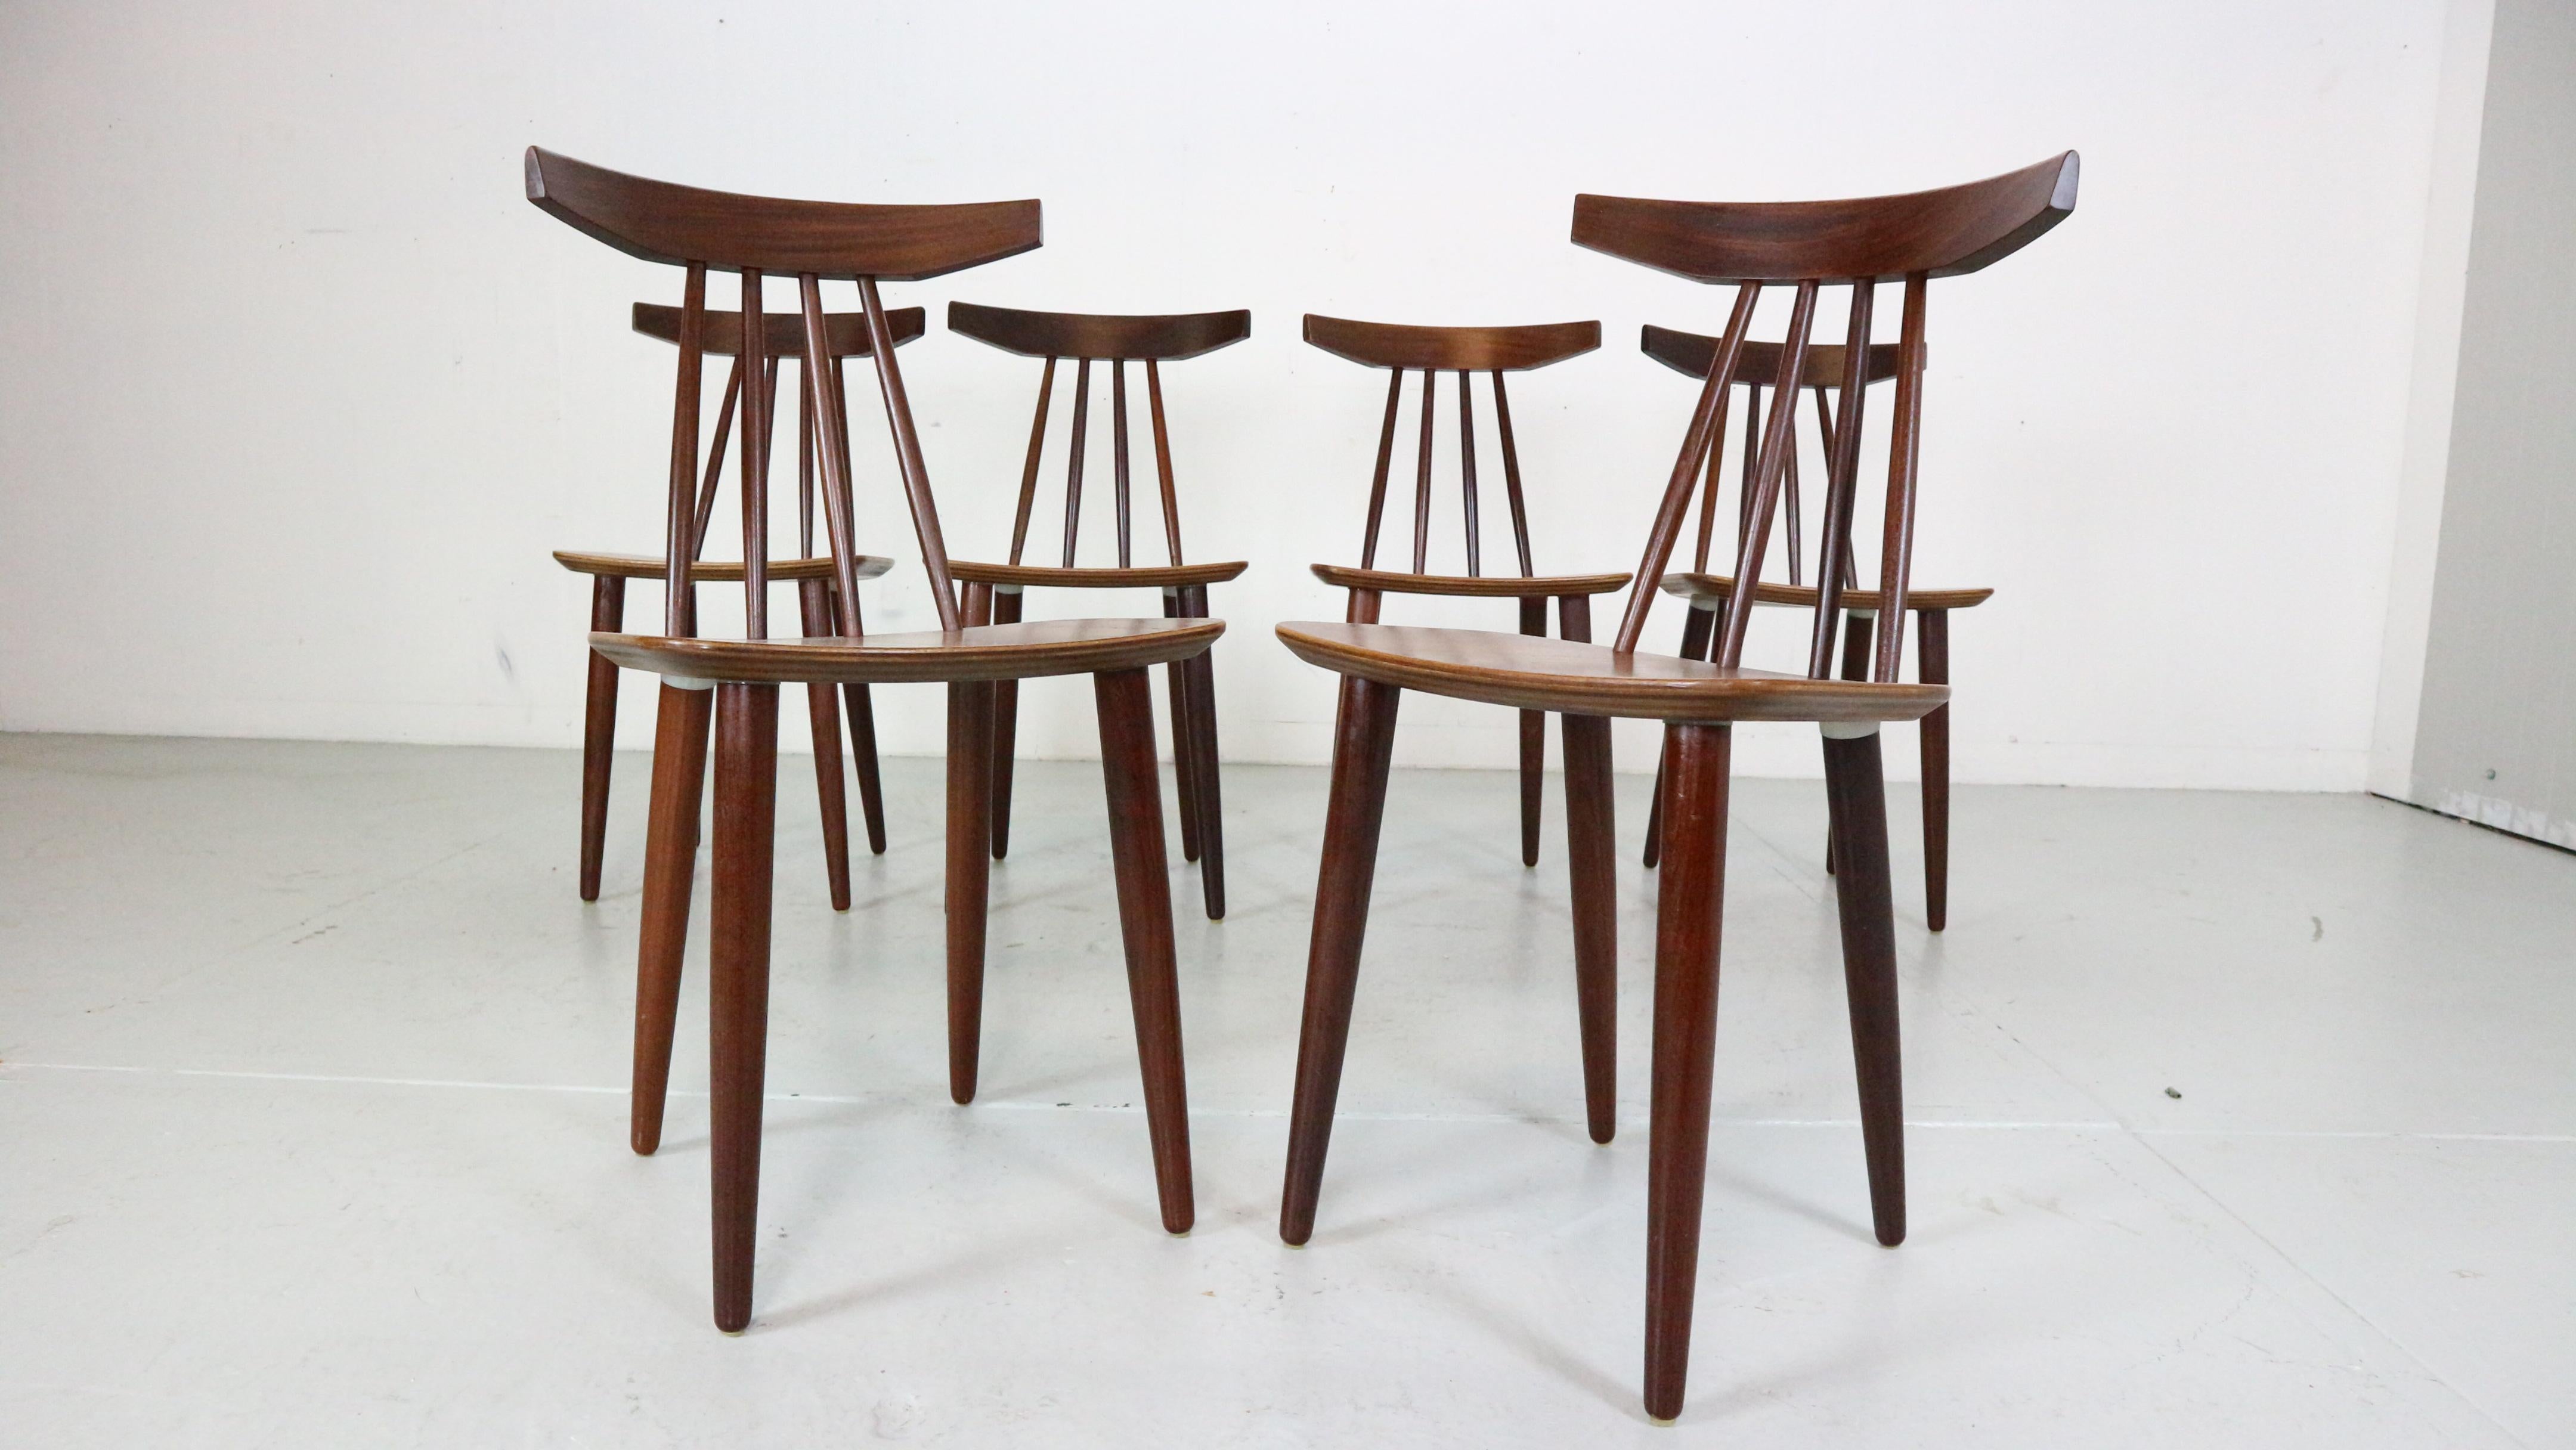 Mid century modern period set of 6 dinning room chairs.

A quit rare set which is designed by Poul Volther and produced for Fremel Røjle, Denmark, 1961.

Model no- 3705.
The chairs are made of teak wood.
All of them are in the great